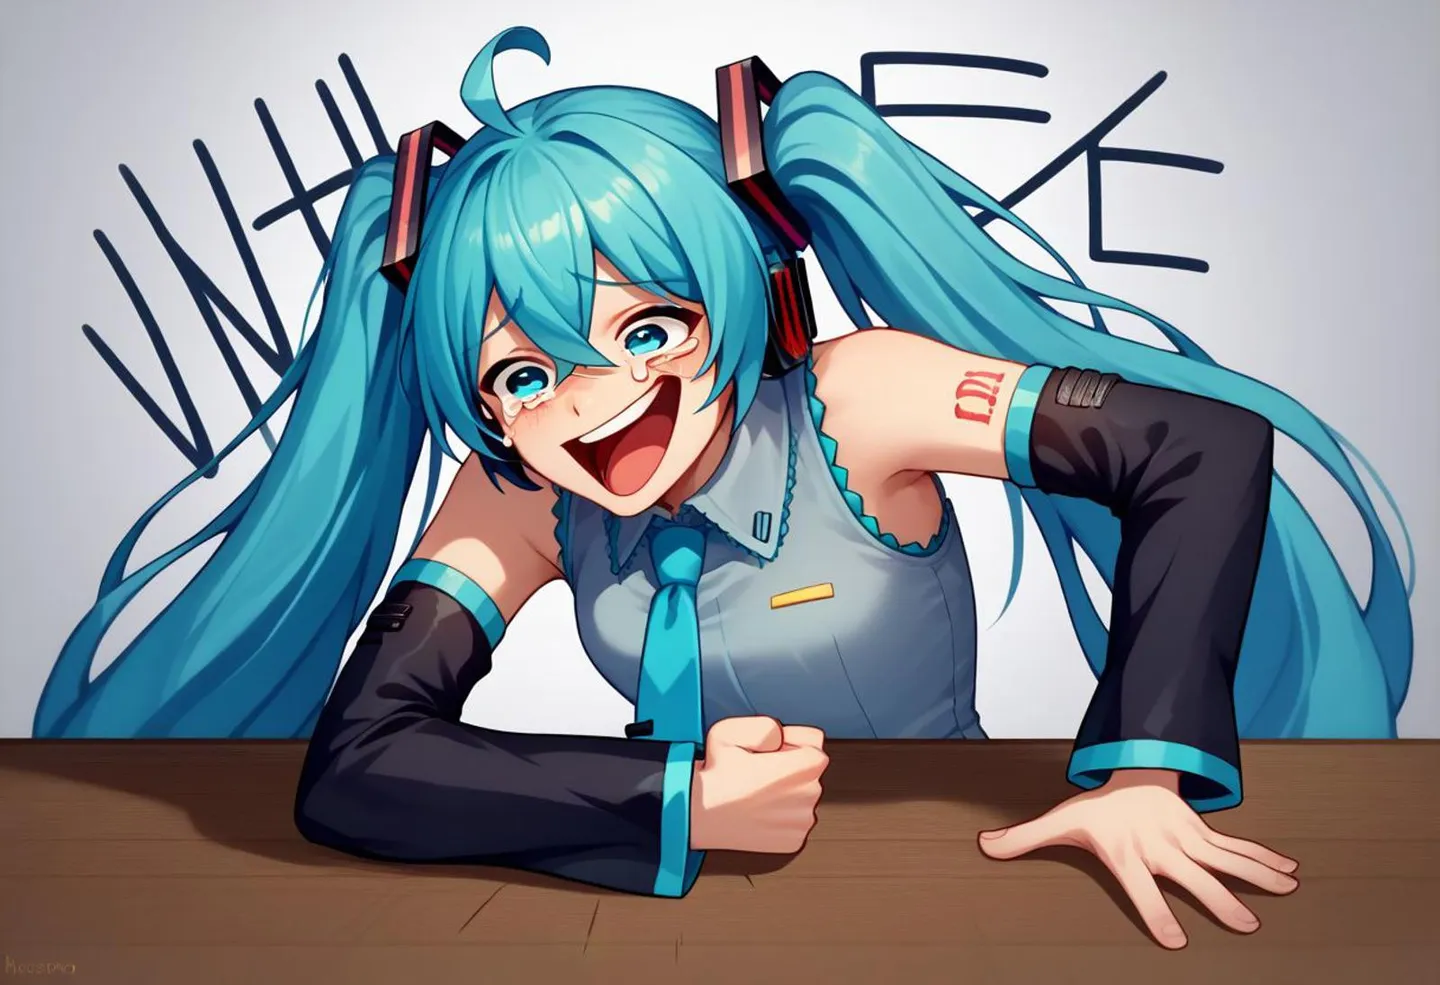 Anime girl with long blue hair laughing with a wide open mouth and cheerful expression. This AI generated image uses Stable Diffusion.